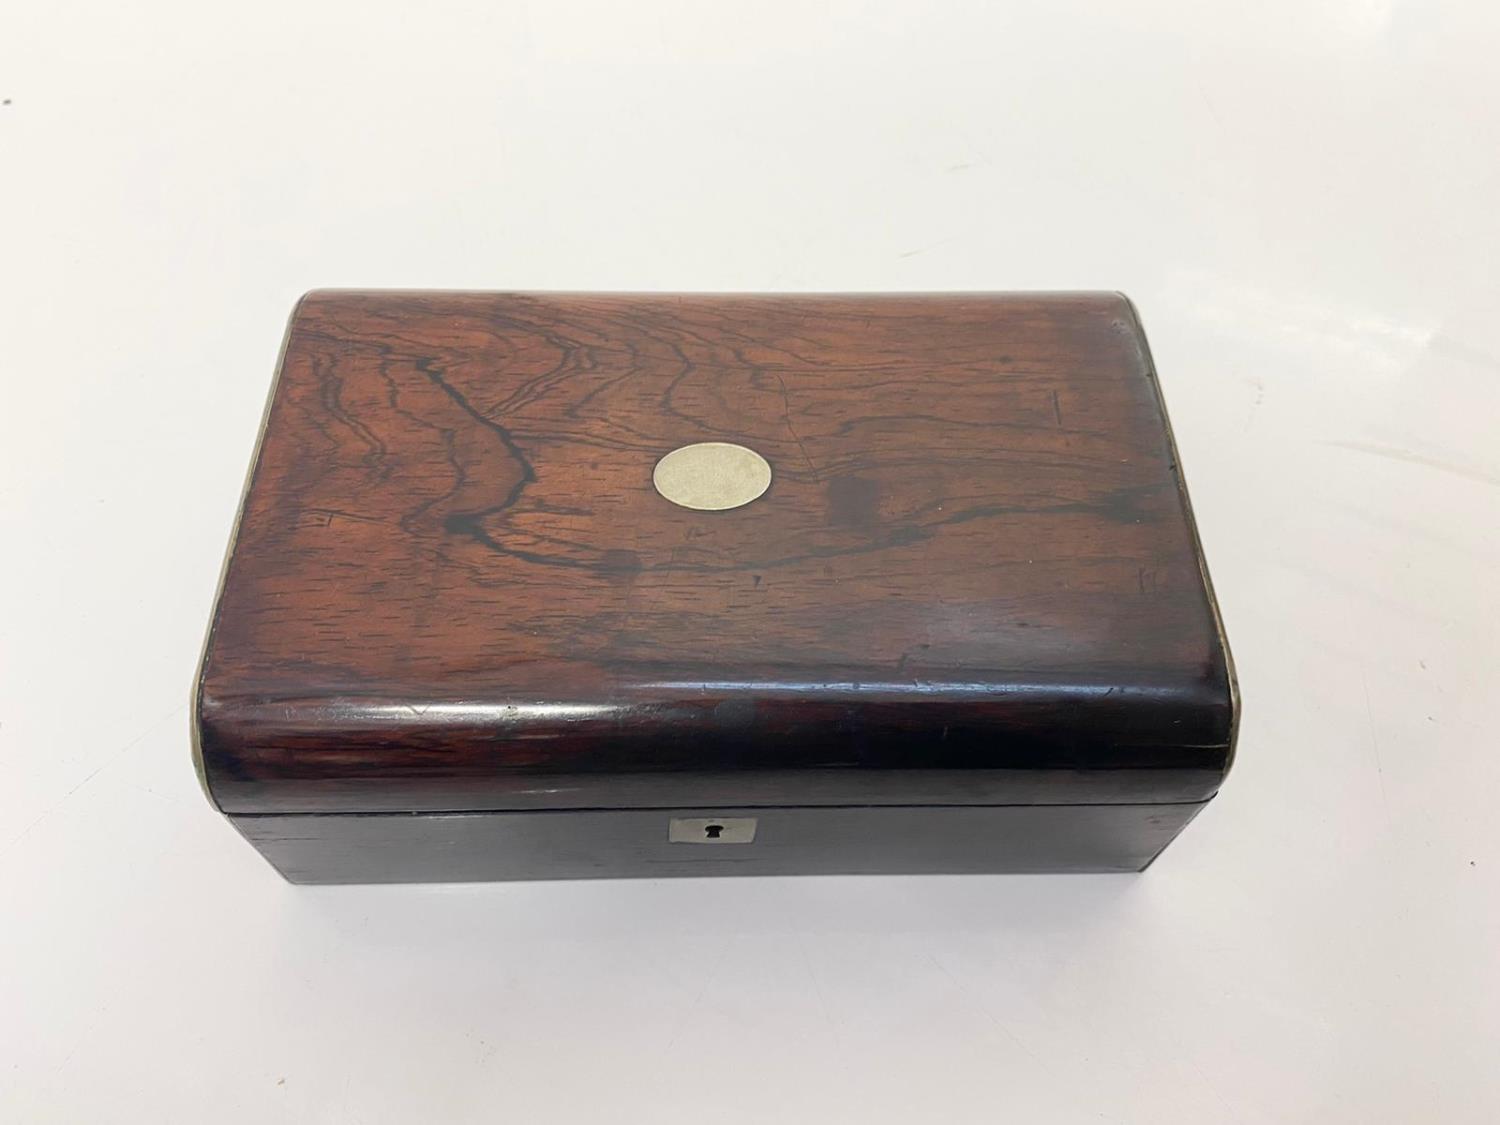 Wooden trinket box with inlaid brass features, 19 x 13x6cm